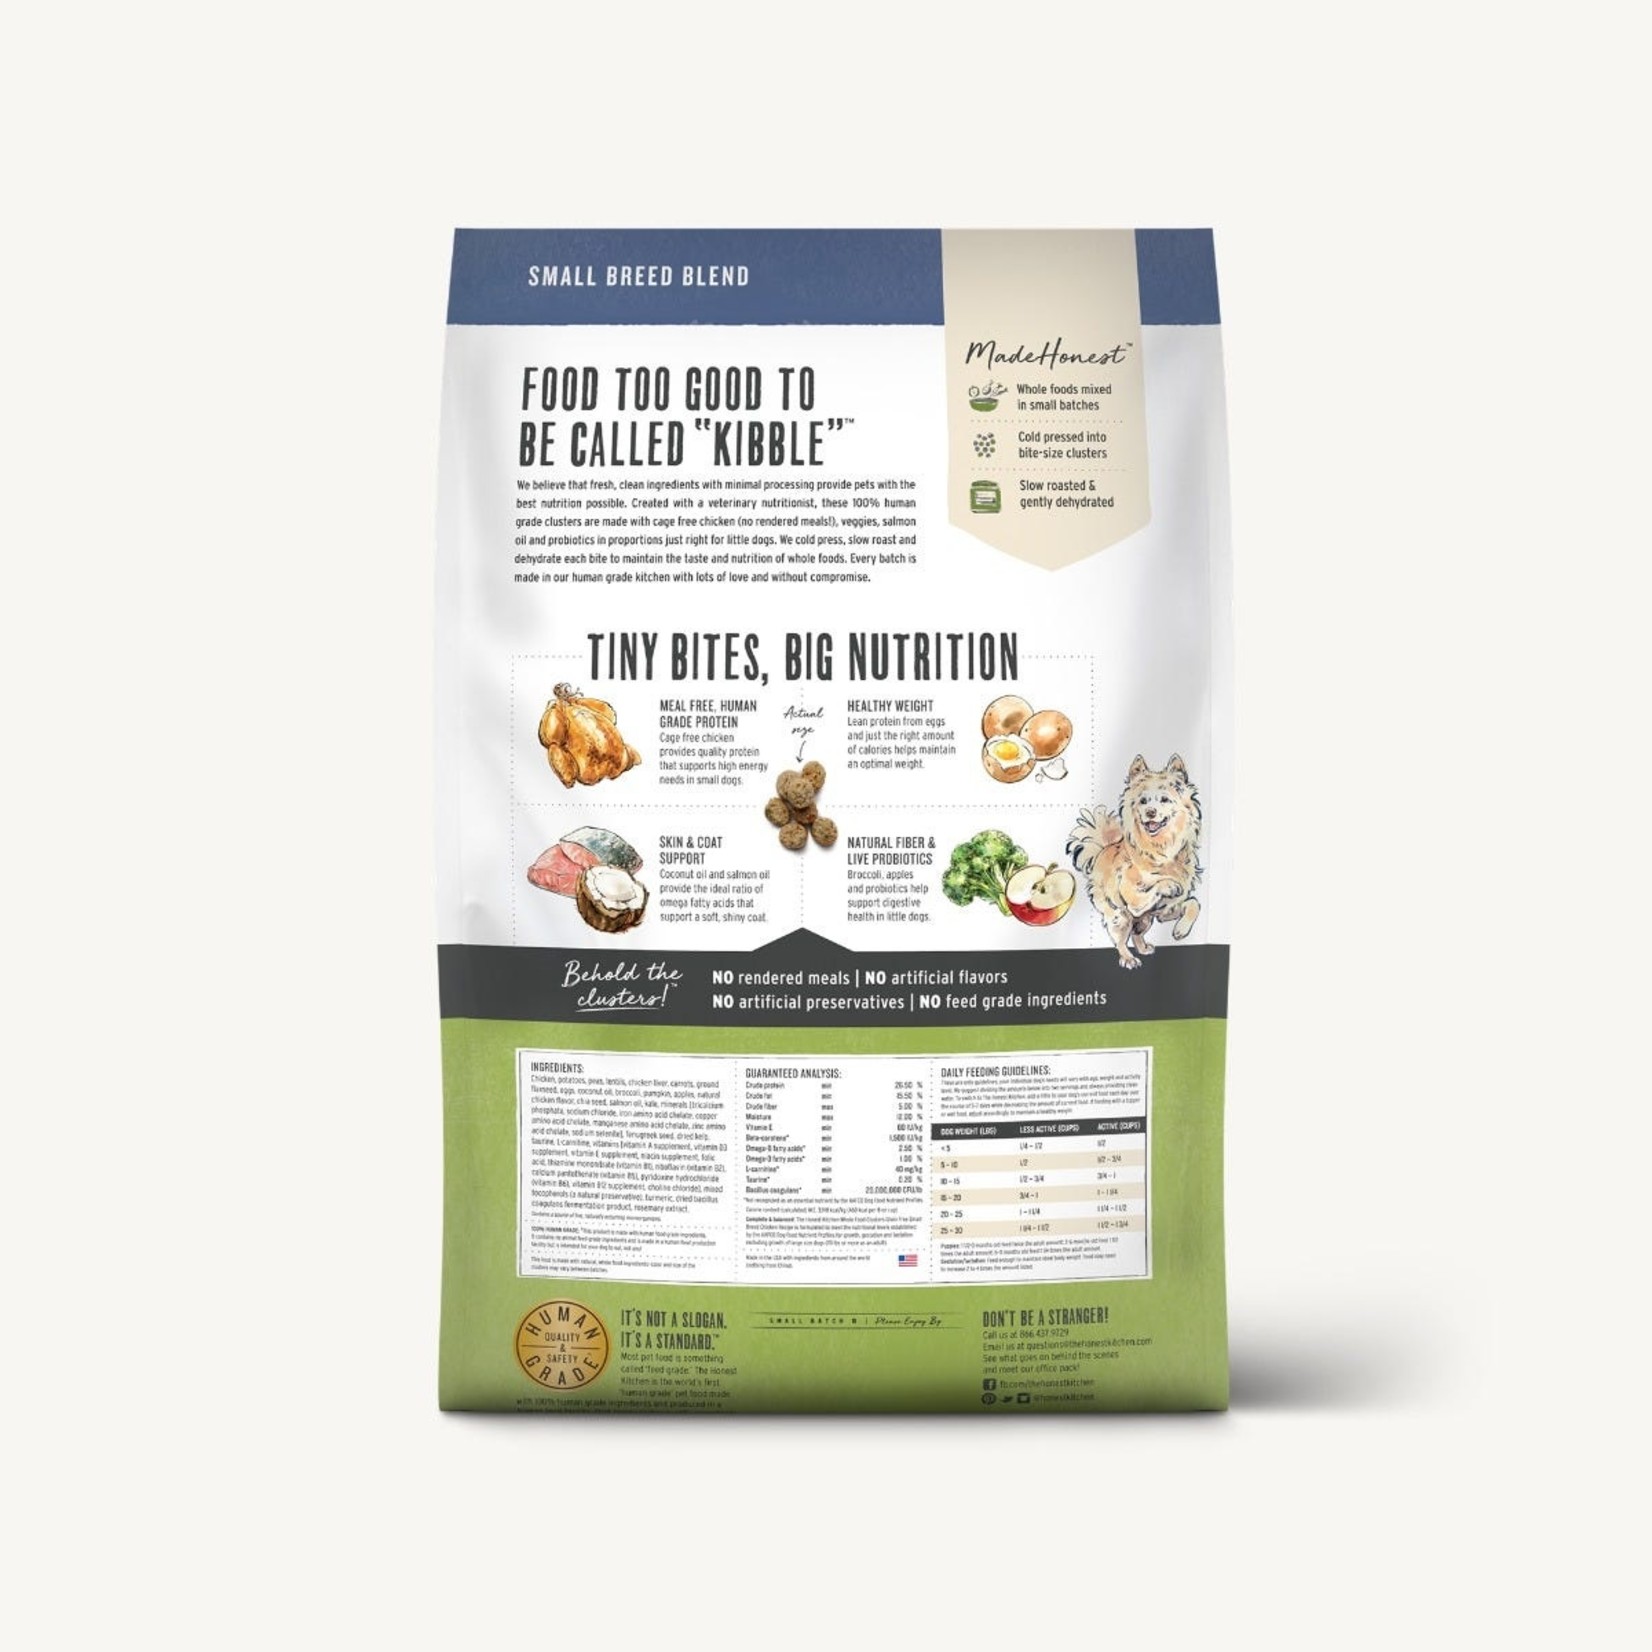 The Honest Kitchen Honest Kitchen Grain Free Chicken Clusters for Small Breeds  10LB